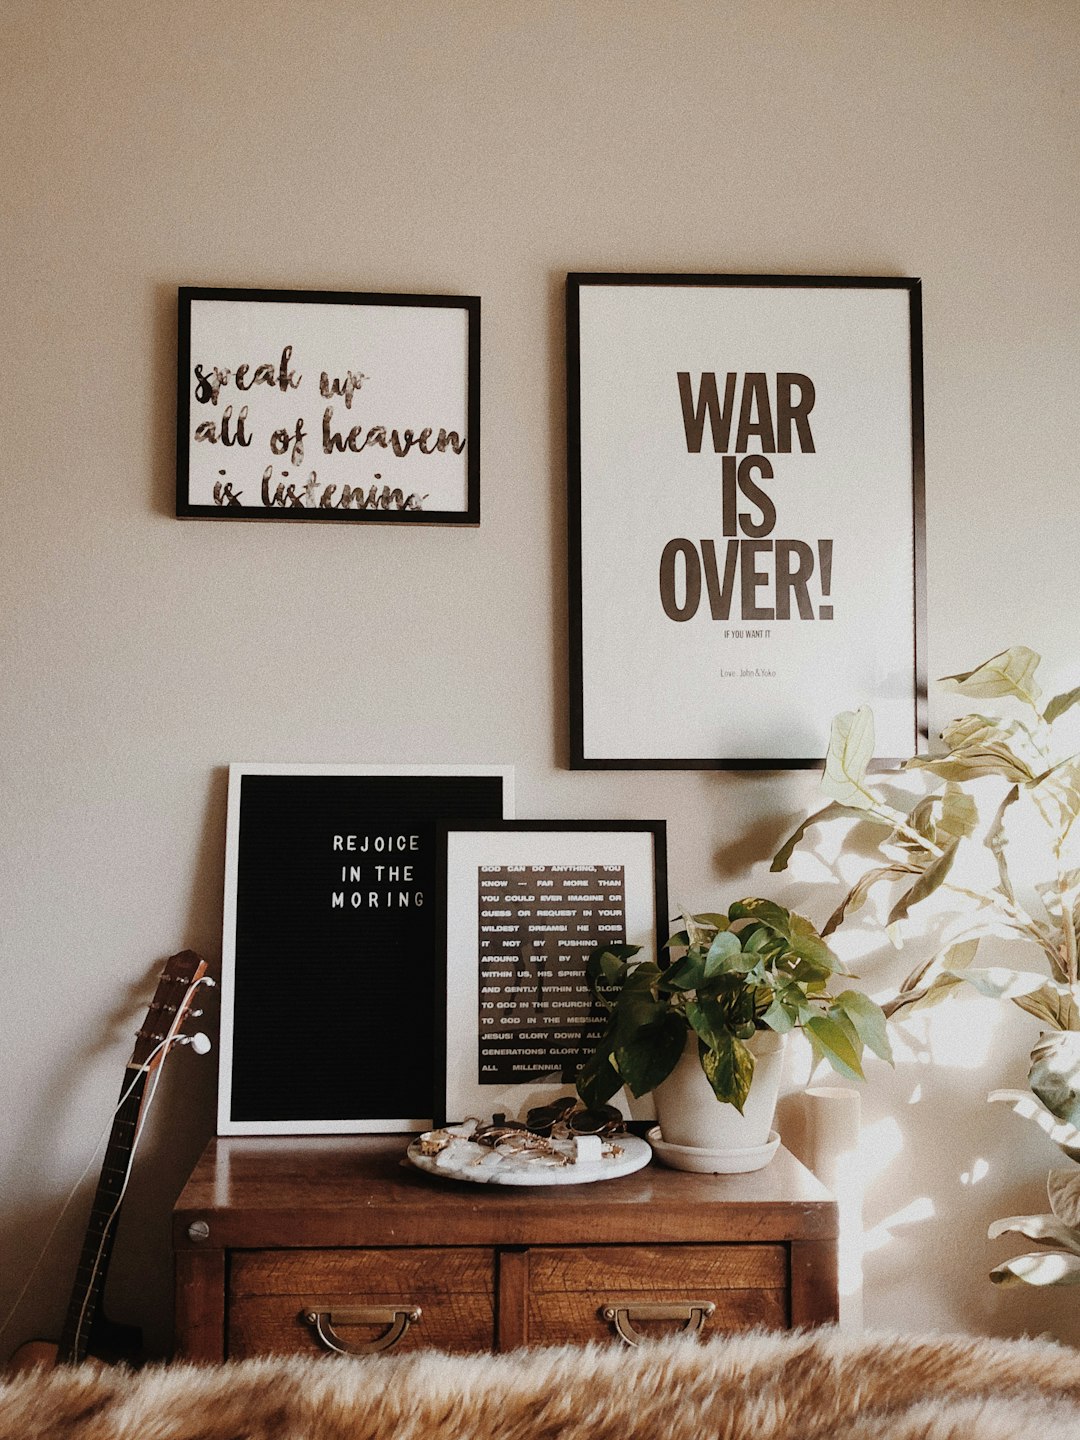 A wall with three framed posters on it, one black and white poster of the text “war is over! talking about heaven”, two color posters in different sizes, a painting in the style of natural light, minimalist, plants, warm colors, a wood table top with small decorations, a guitar leaning against the wall, white walls.